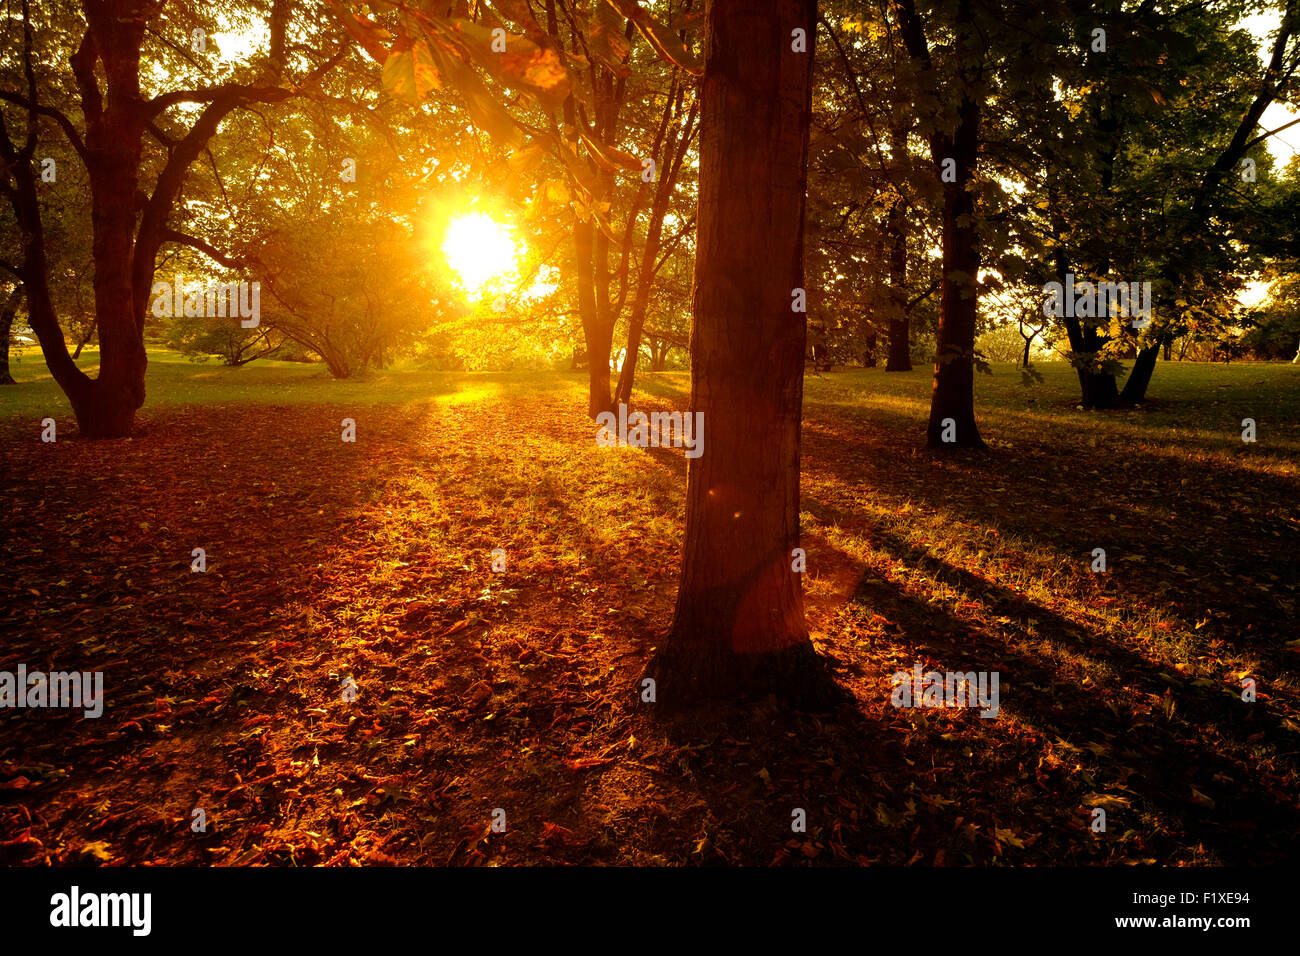 Sun shining through trees in a forest in the Autumn Stock Photo